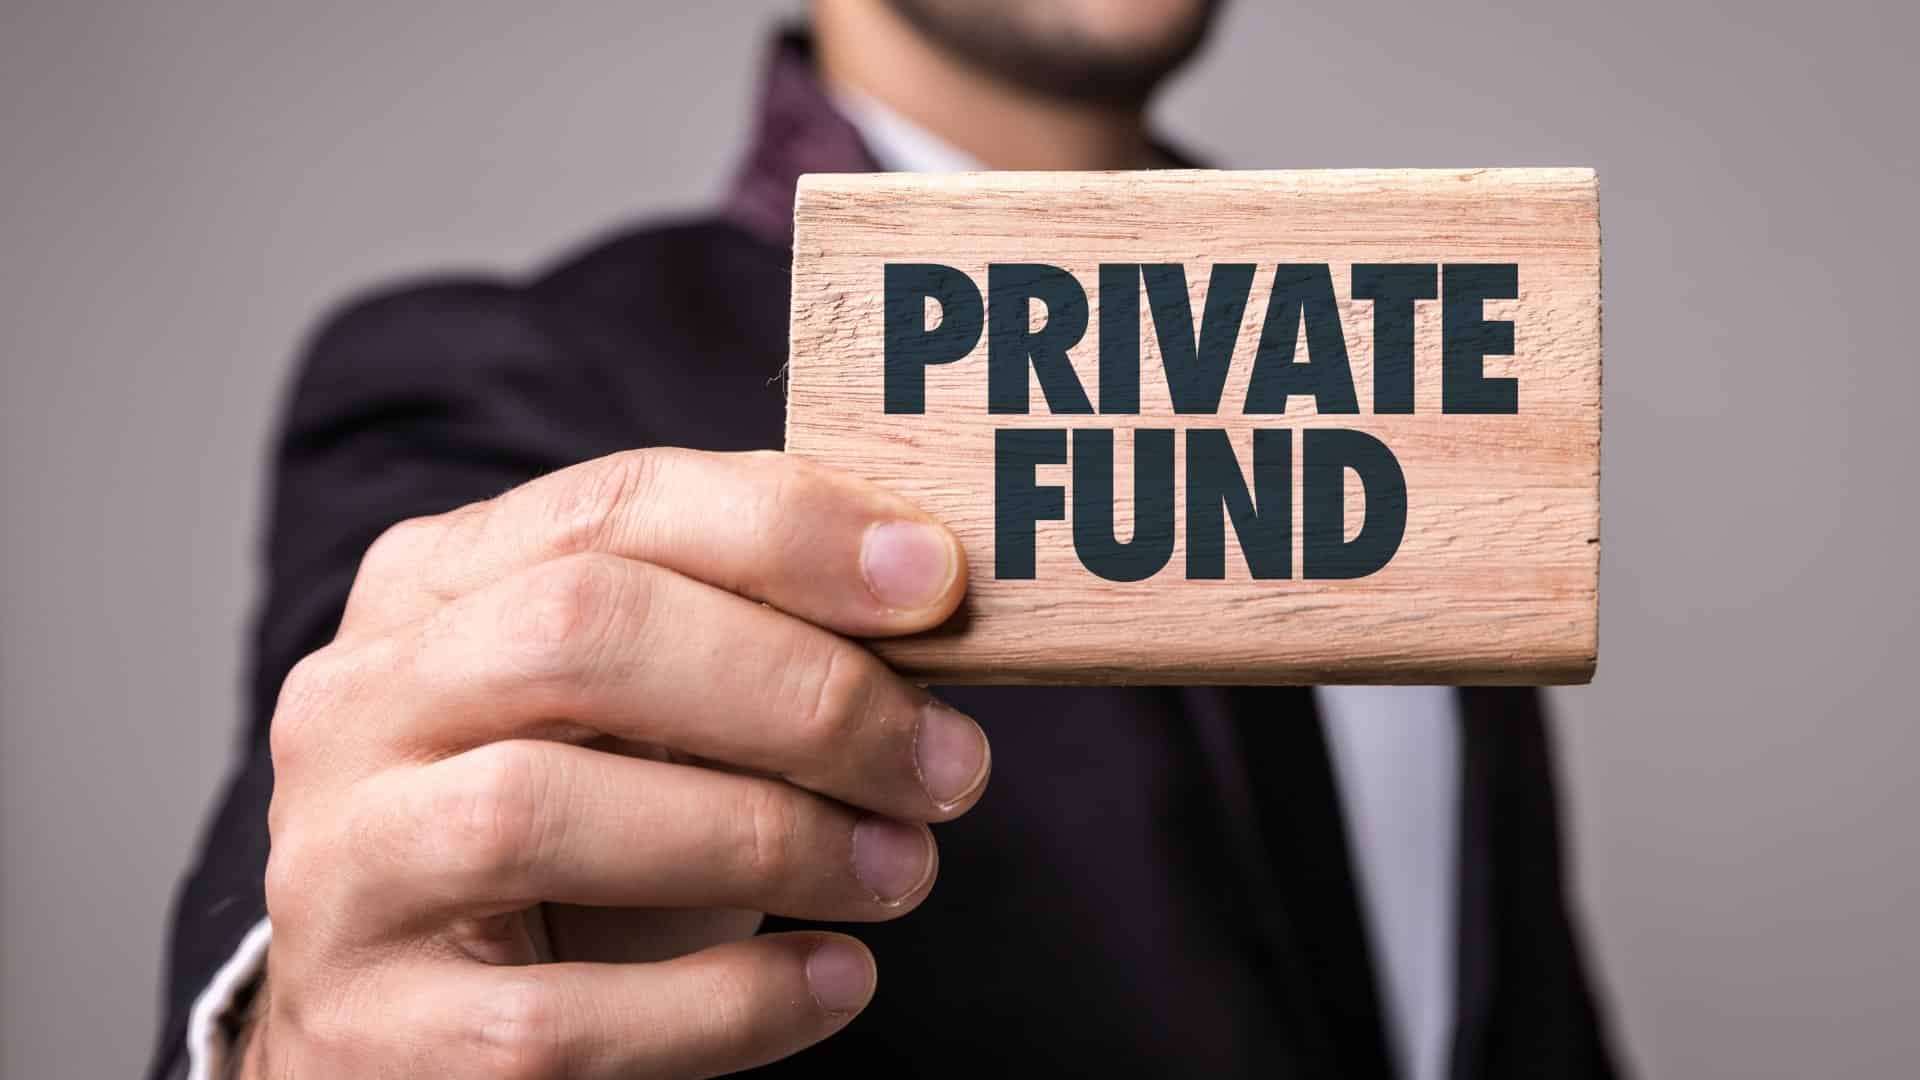 Starting a Private Fund-Type Company in the UAE: Compliance and Documentation Guide